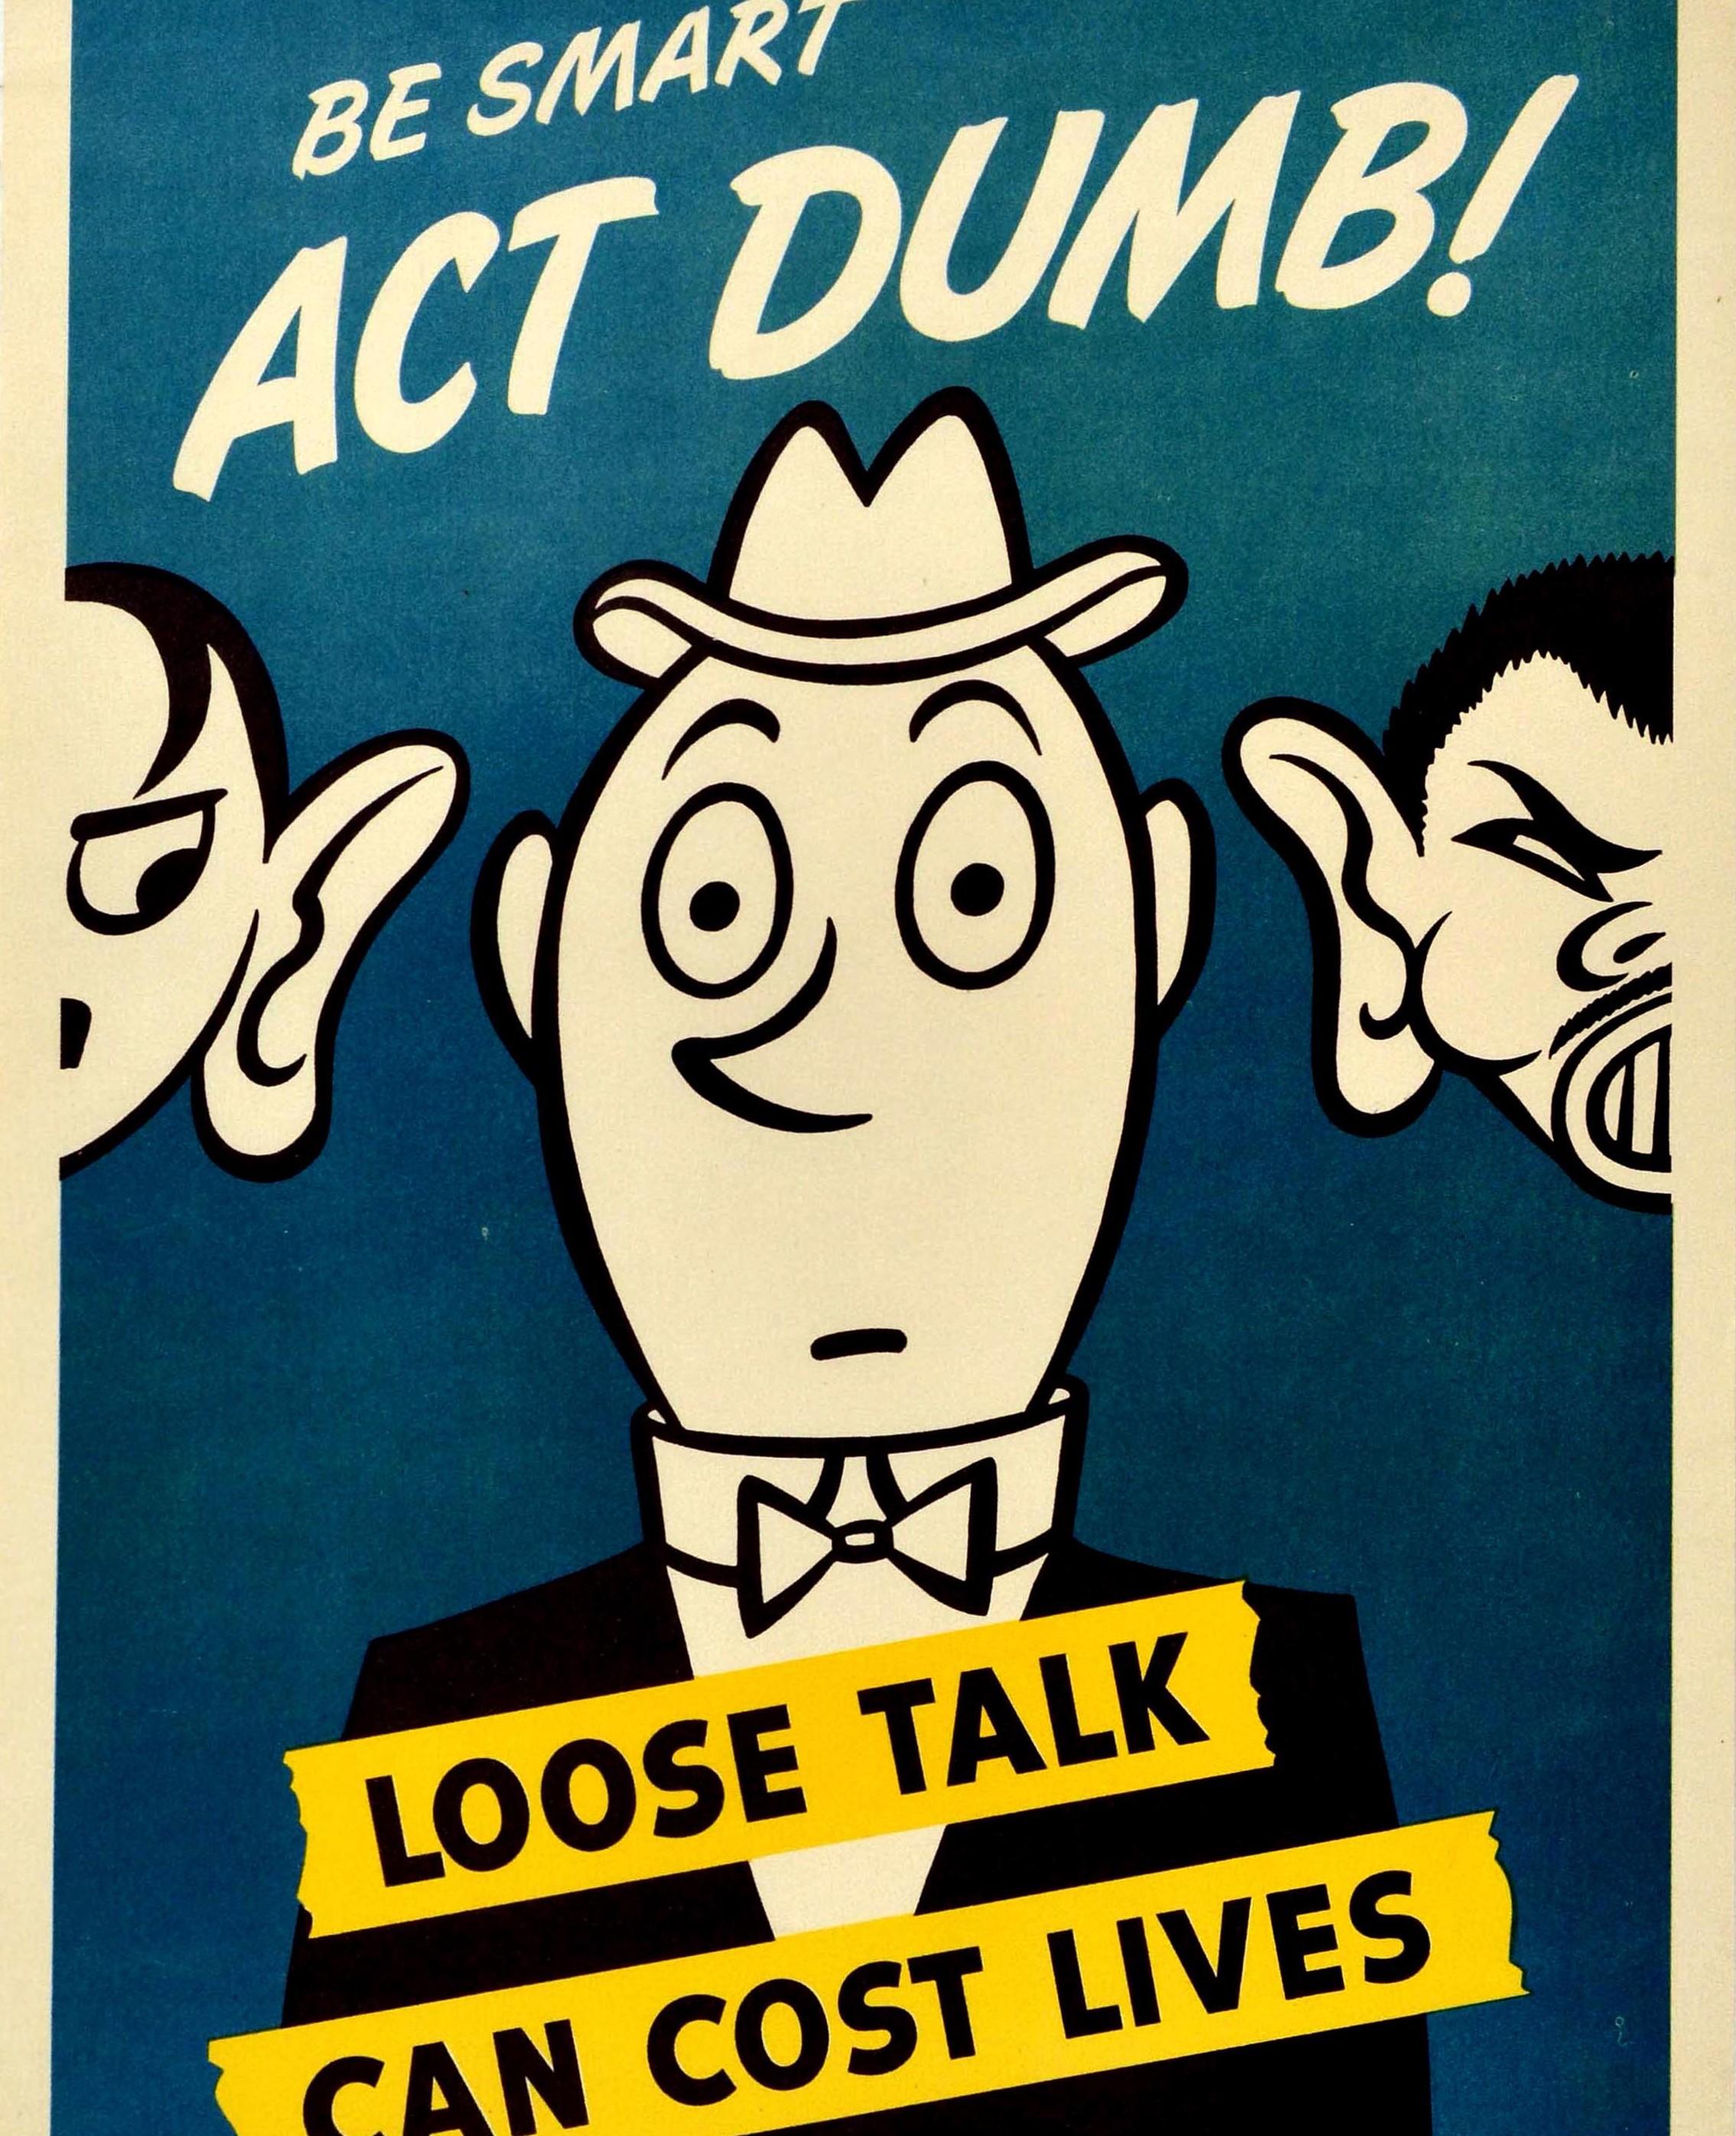 American Original Vintage Poster Be Smart Act Dumb Loose Talk Can Cost Lives WWII Defense